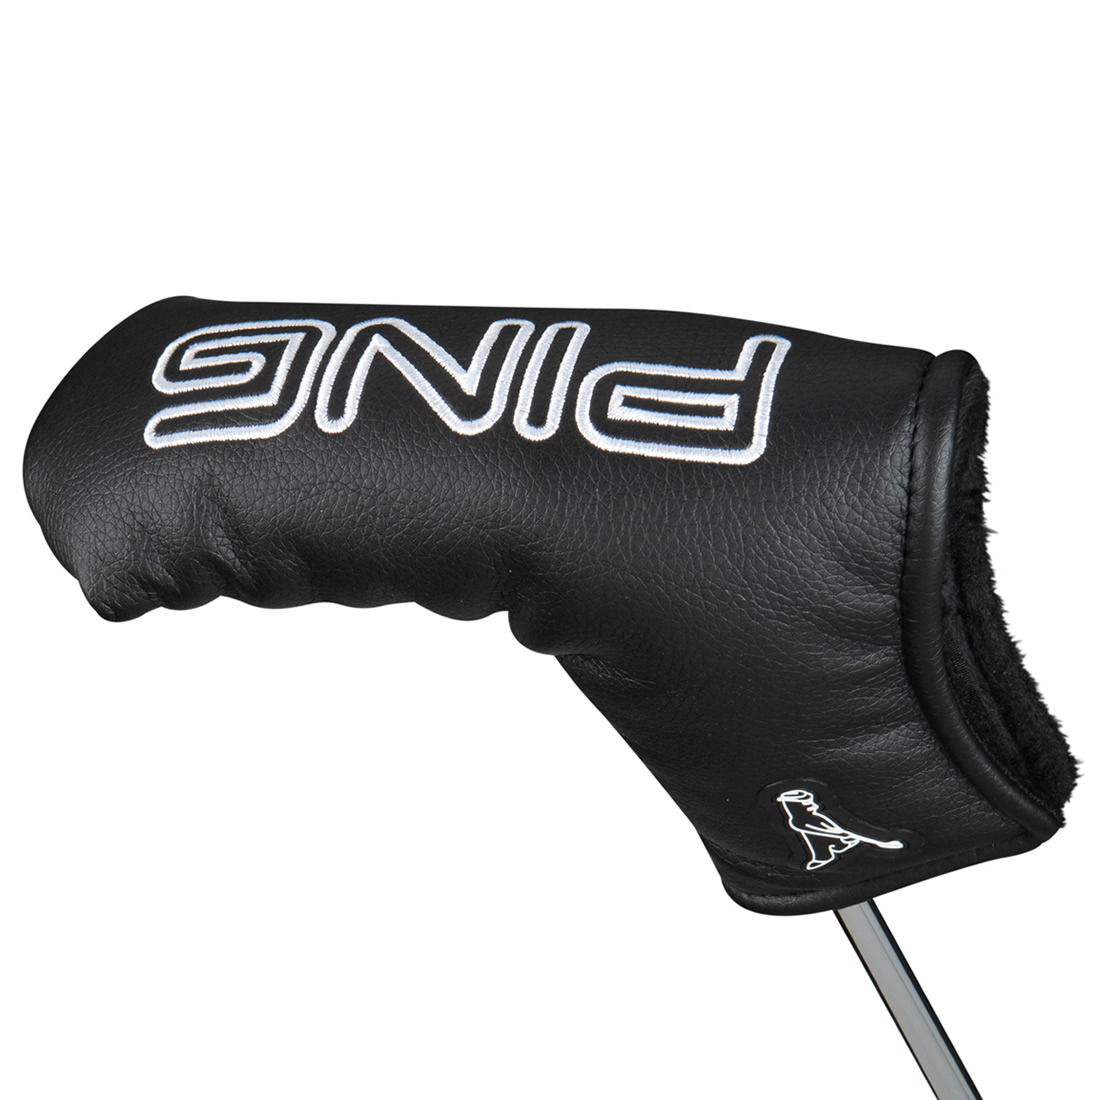 Ping Putter Cover Black/White | Golf